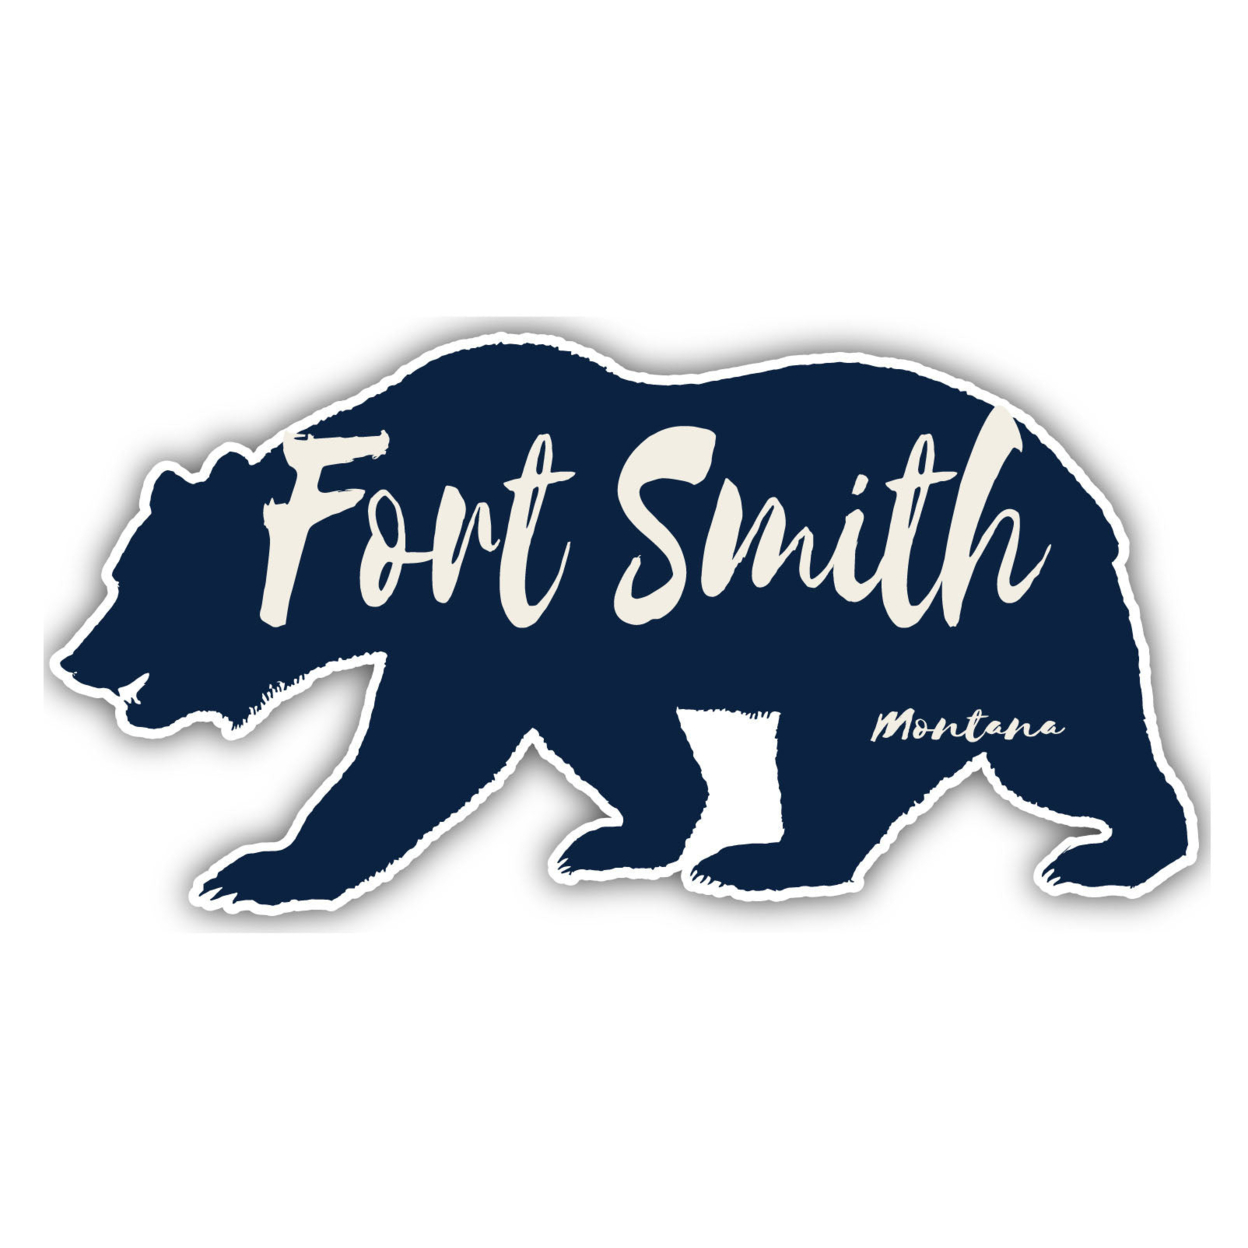 Fort Smith Montana Souvenir Decorative Stickers (Choose Theme And Size) - Single Unit, 12-Inch, Adventures Awaits